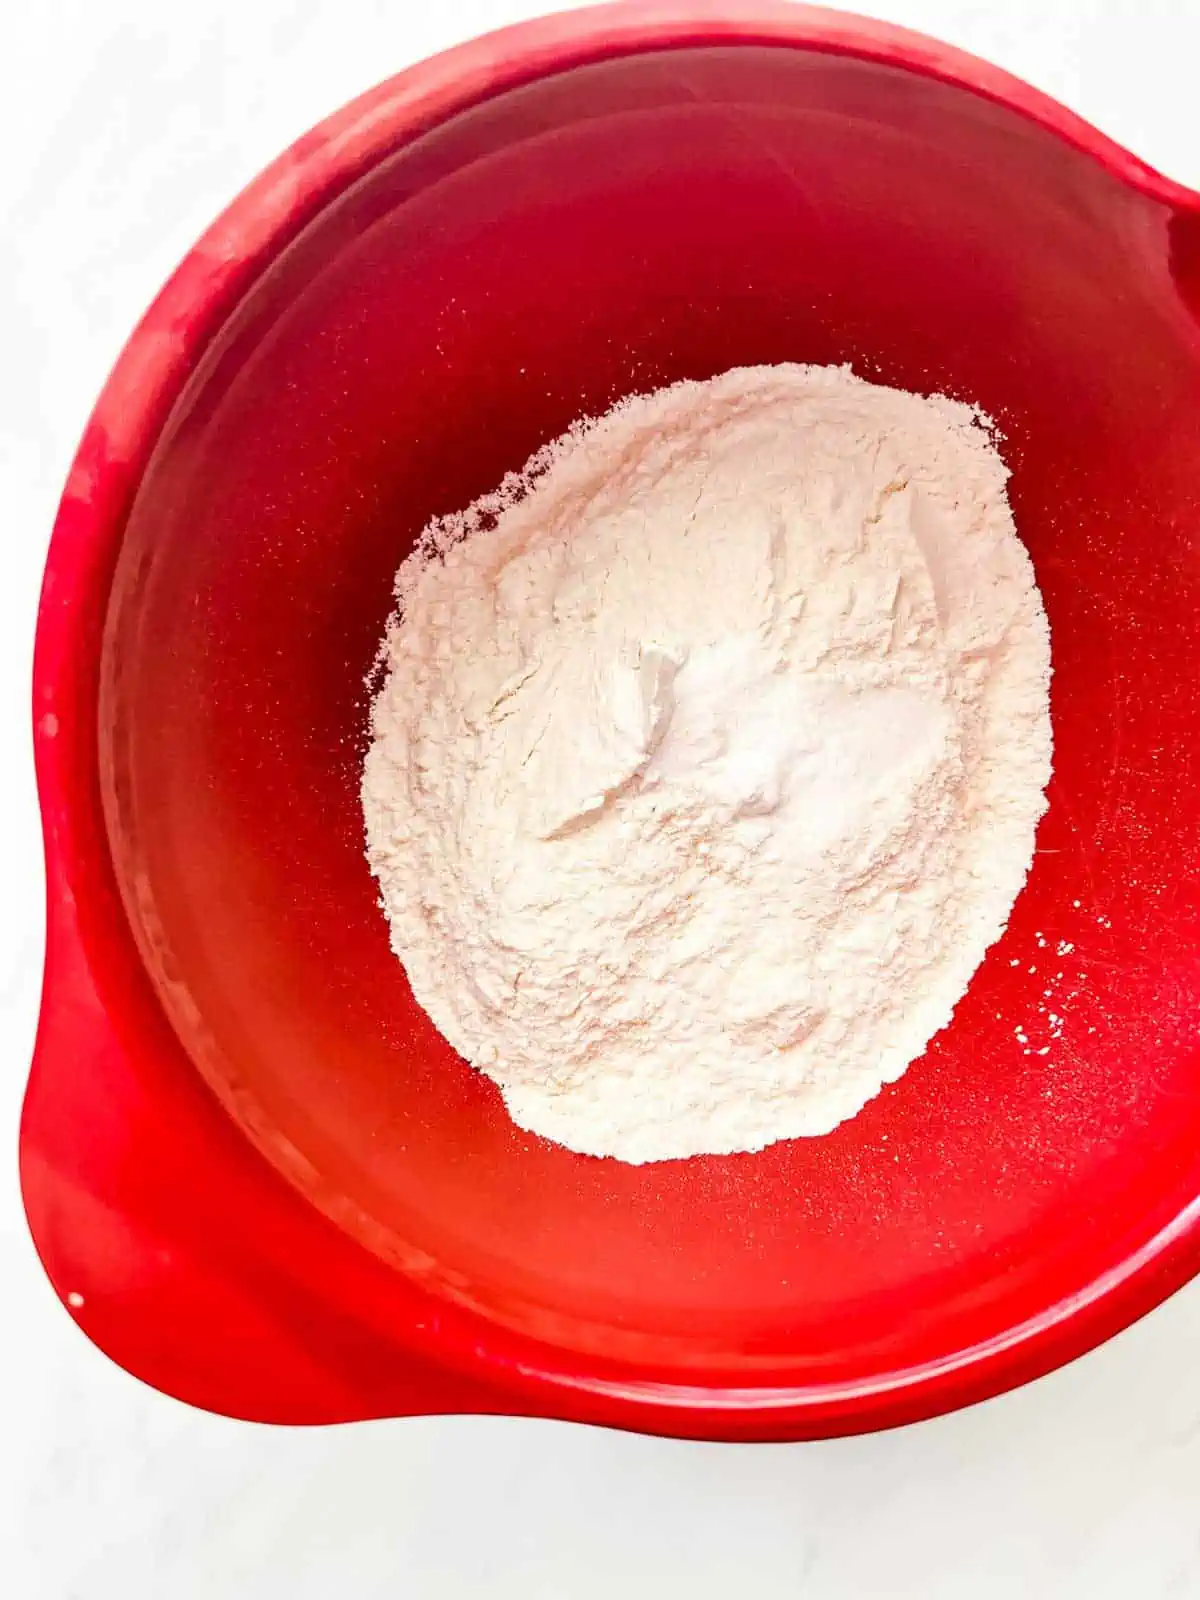 Flour, salt, and baking powder in a large red bowl.